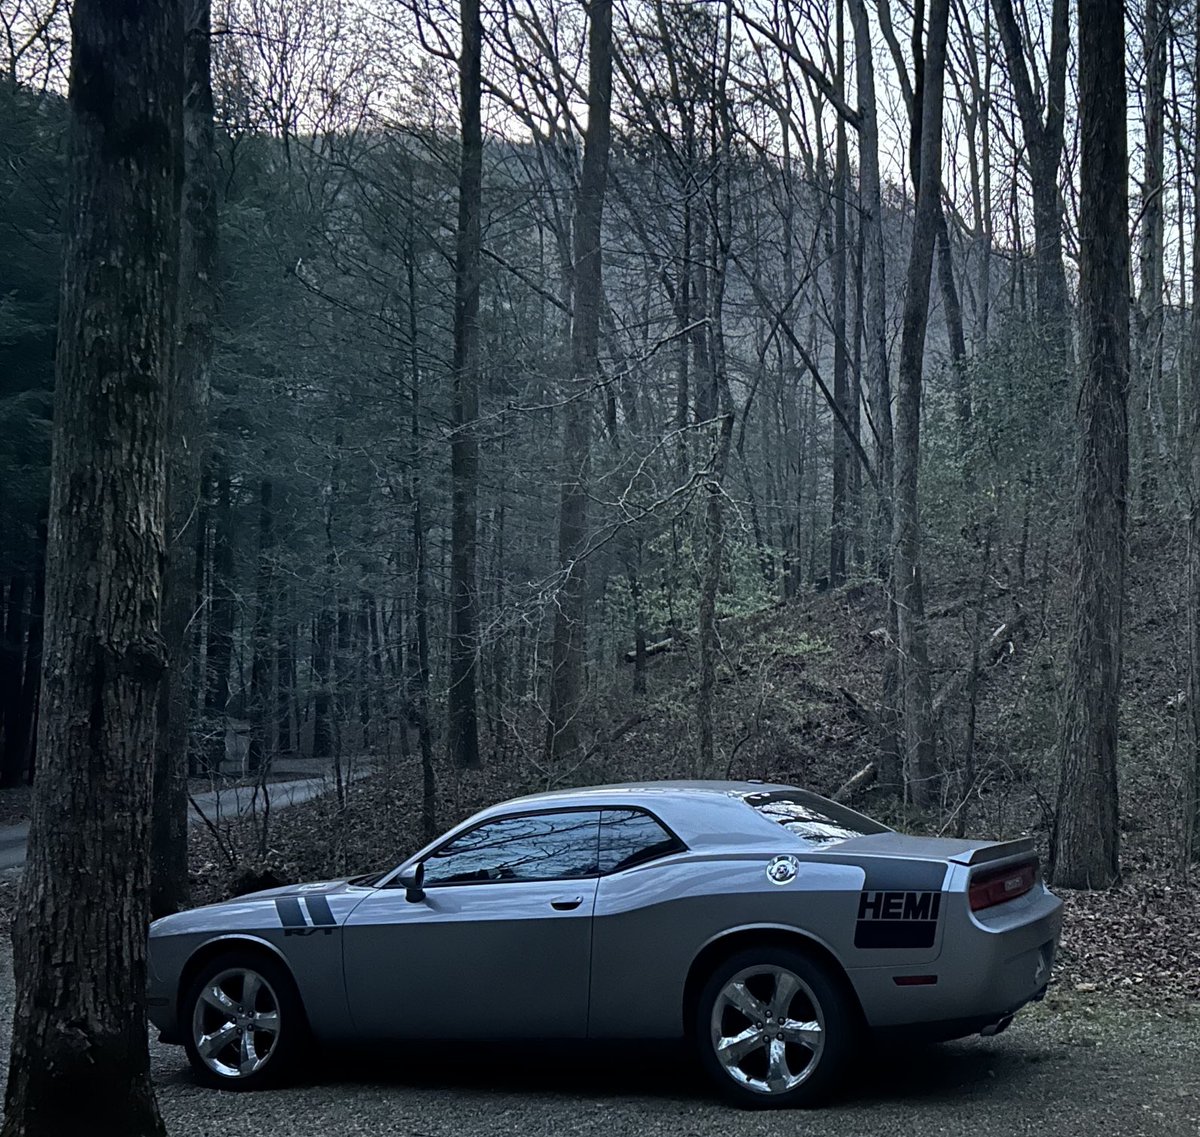 Sometimes you just have to head to the hills!!  #dodgechallenger #camping